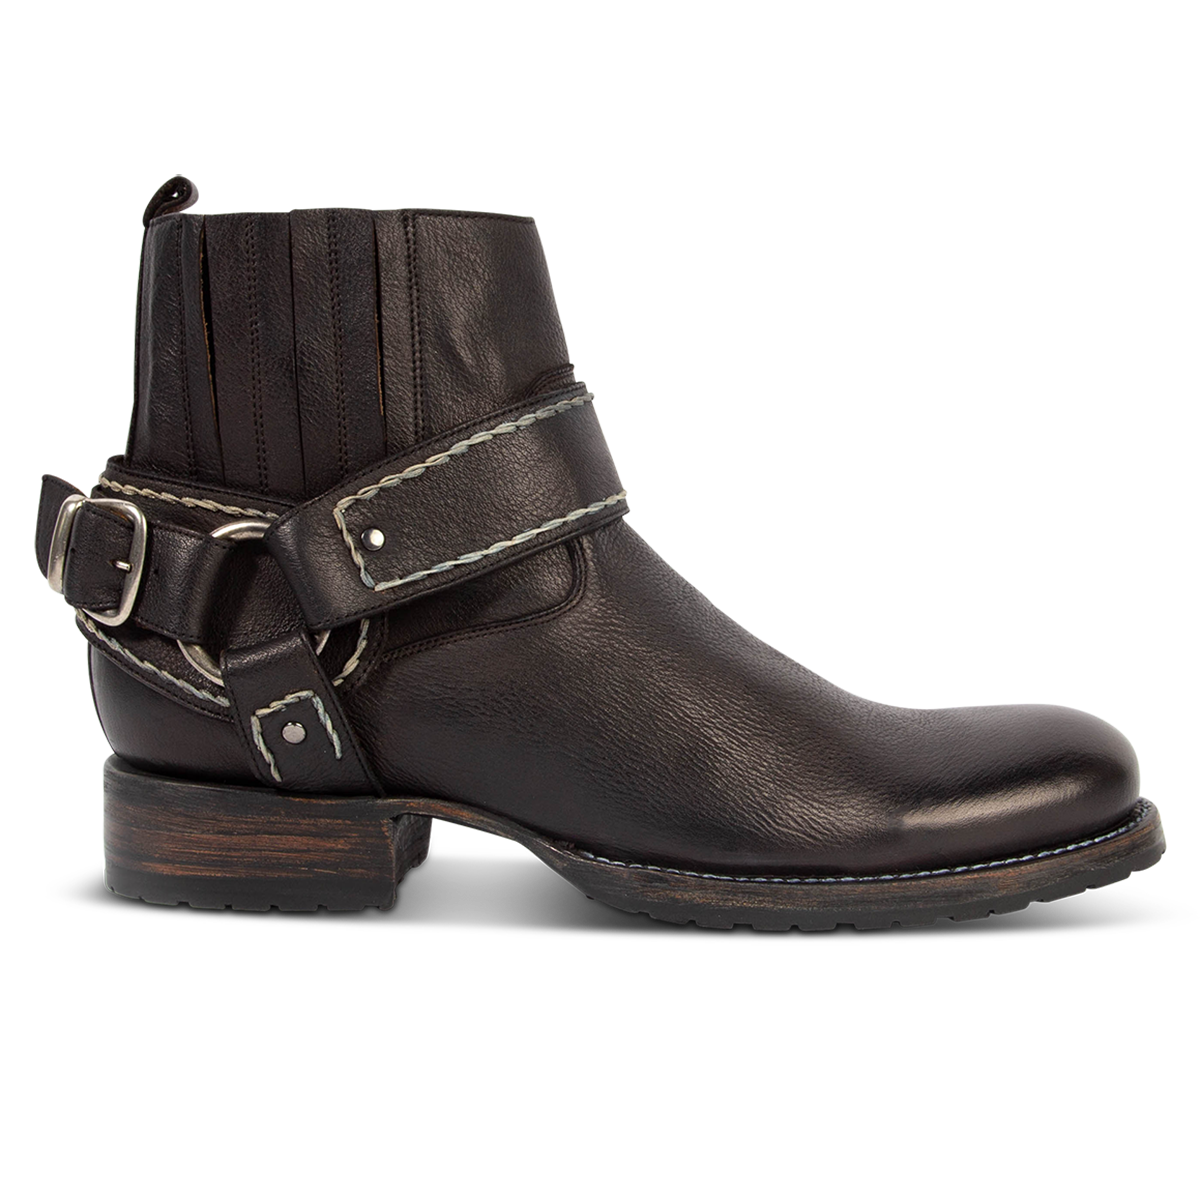 FREEBIRD men's Dallas black leather boot with an inside zip closure, leather ankle harness and gore detailing